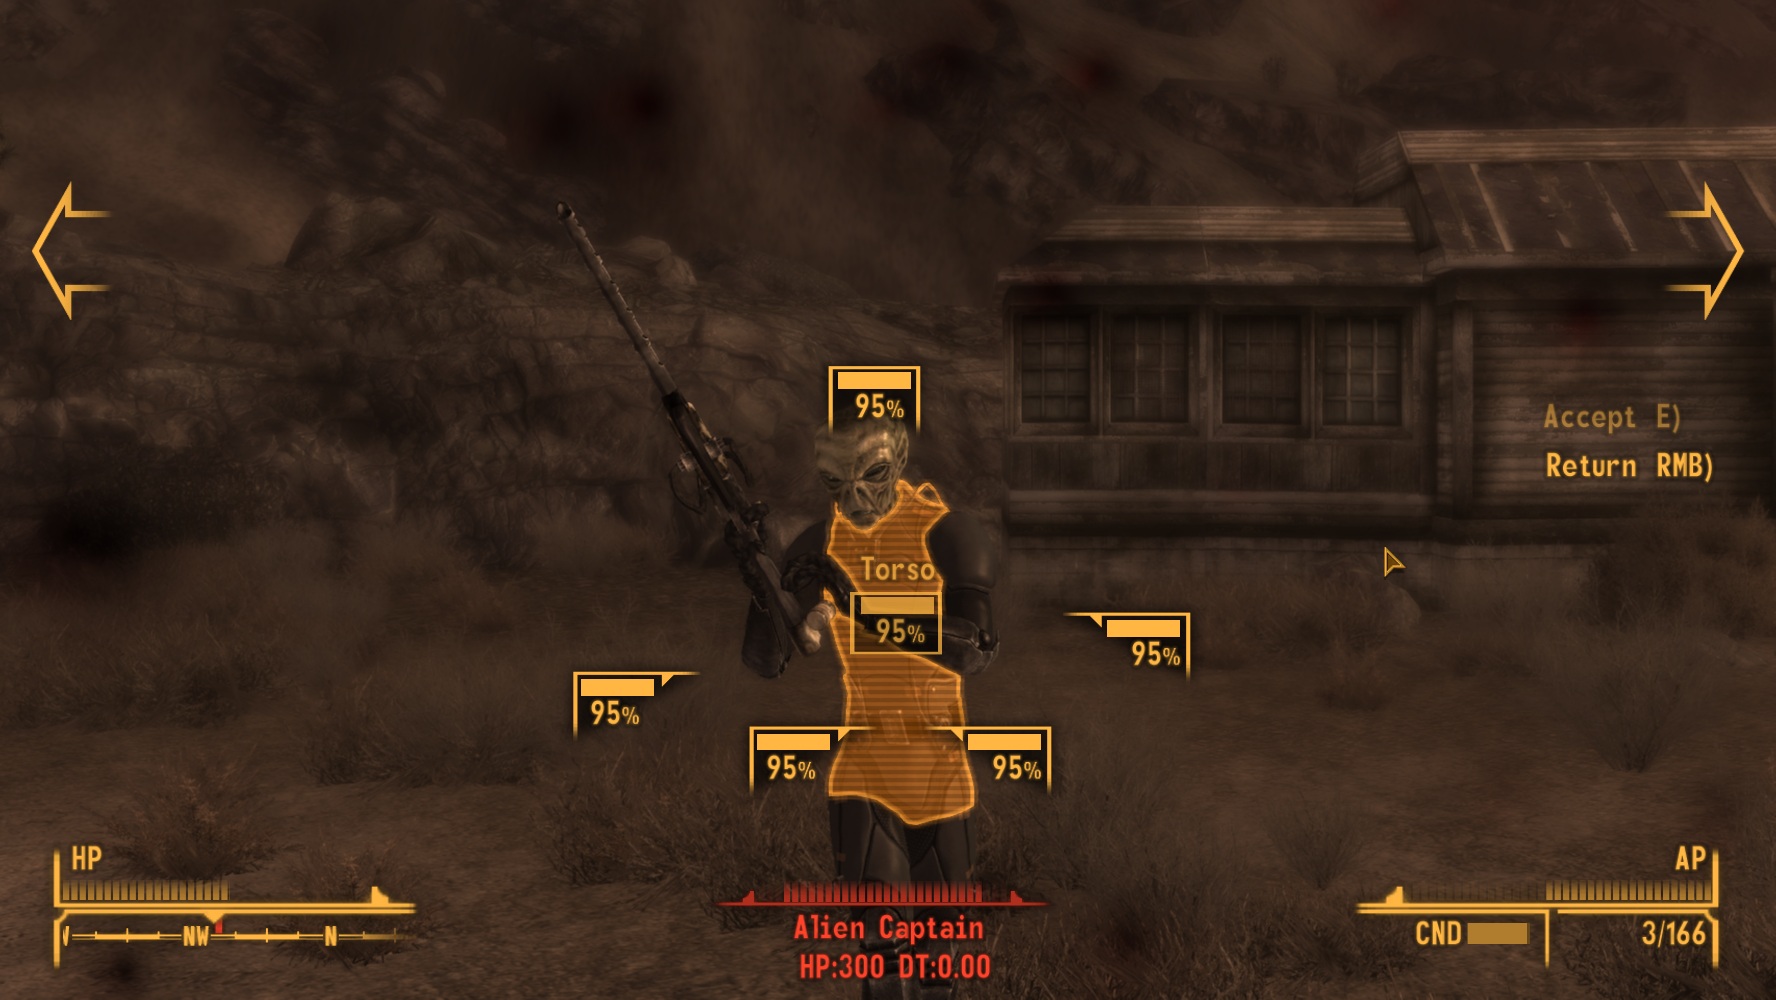 this machine fallout new vegas quest